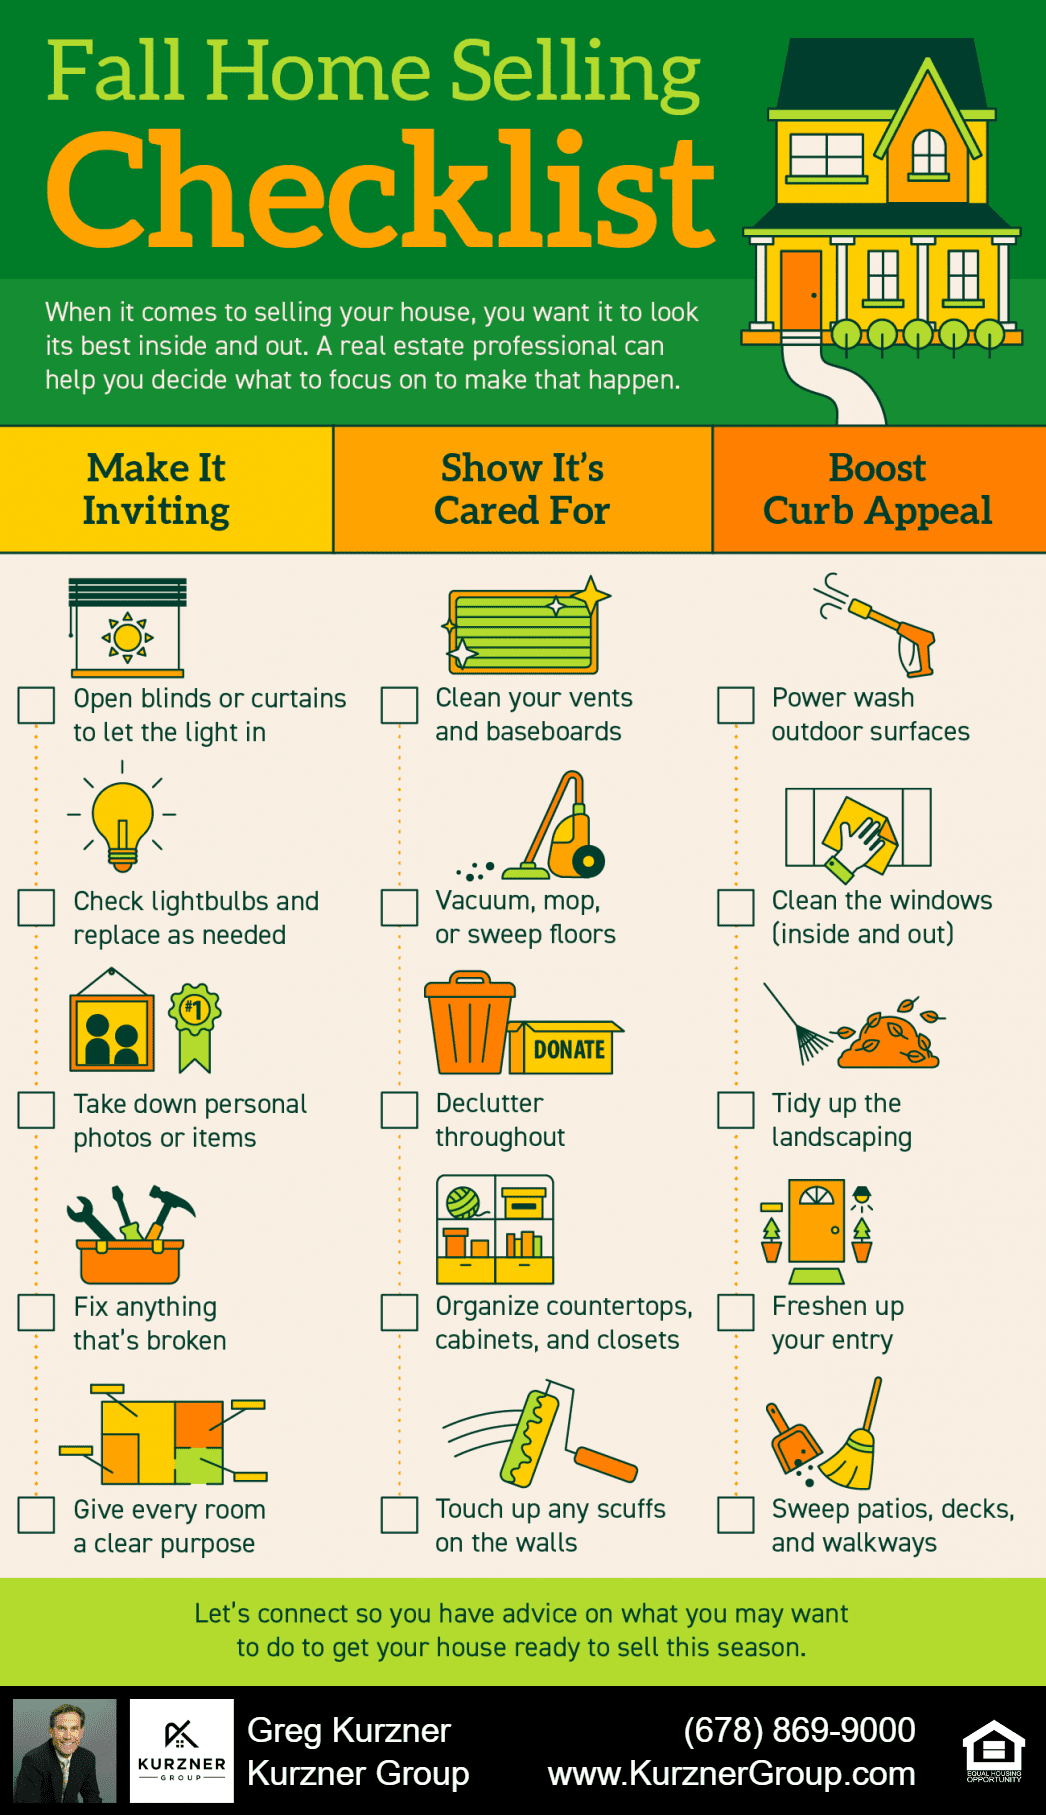 Fall Home Selling Checklist [INFOGRAPHIC